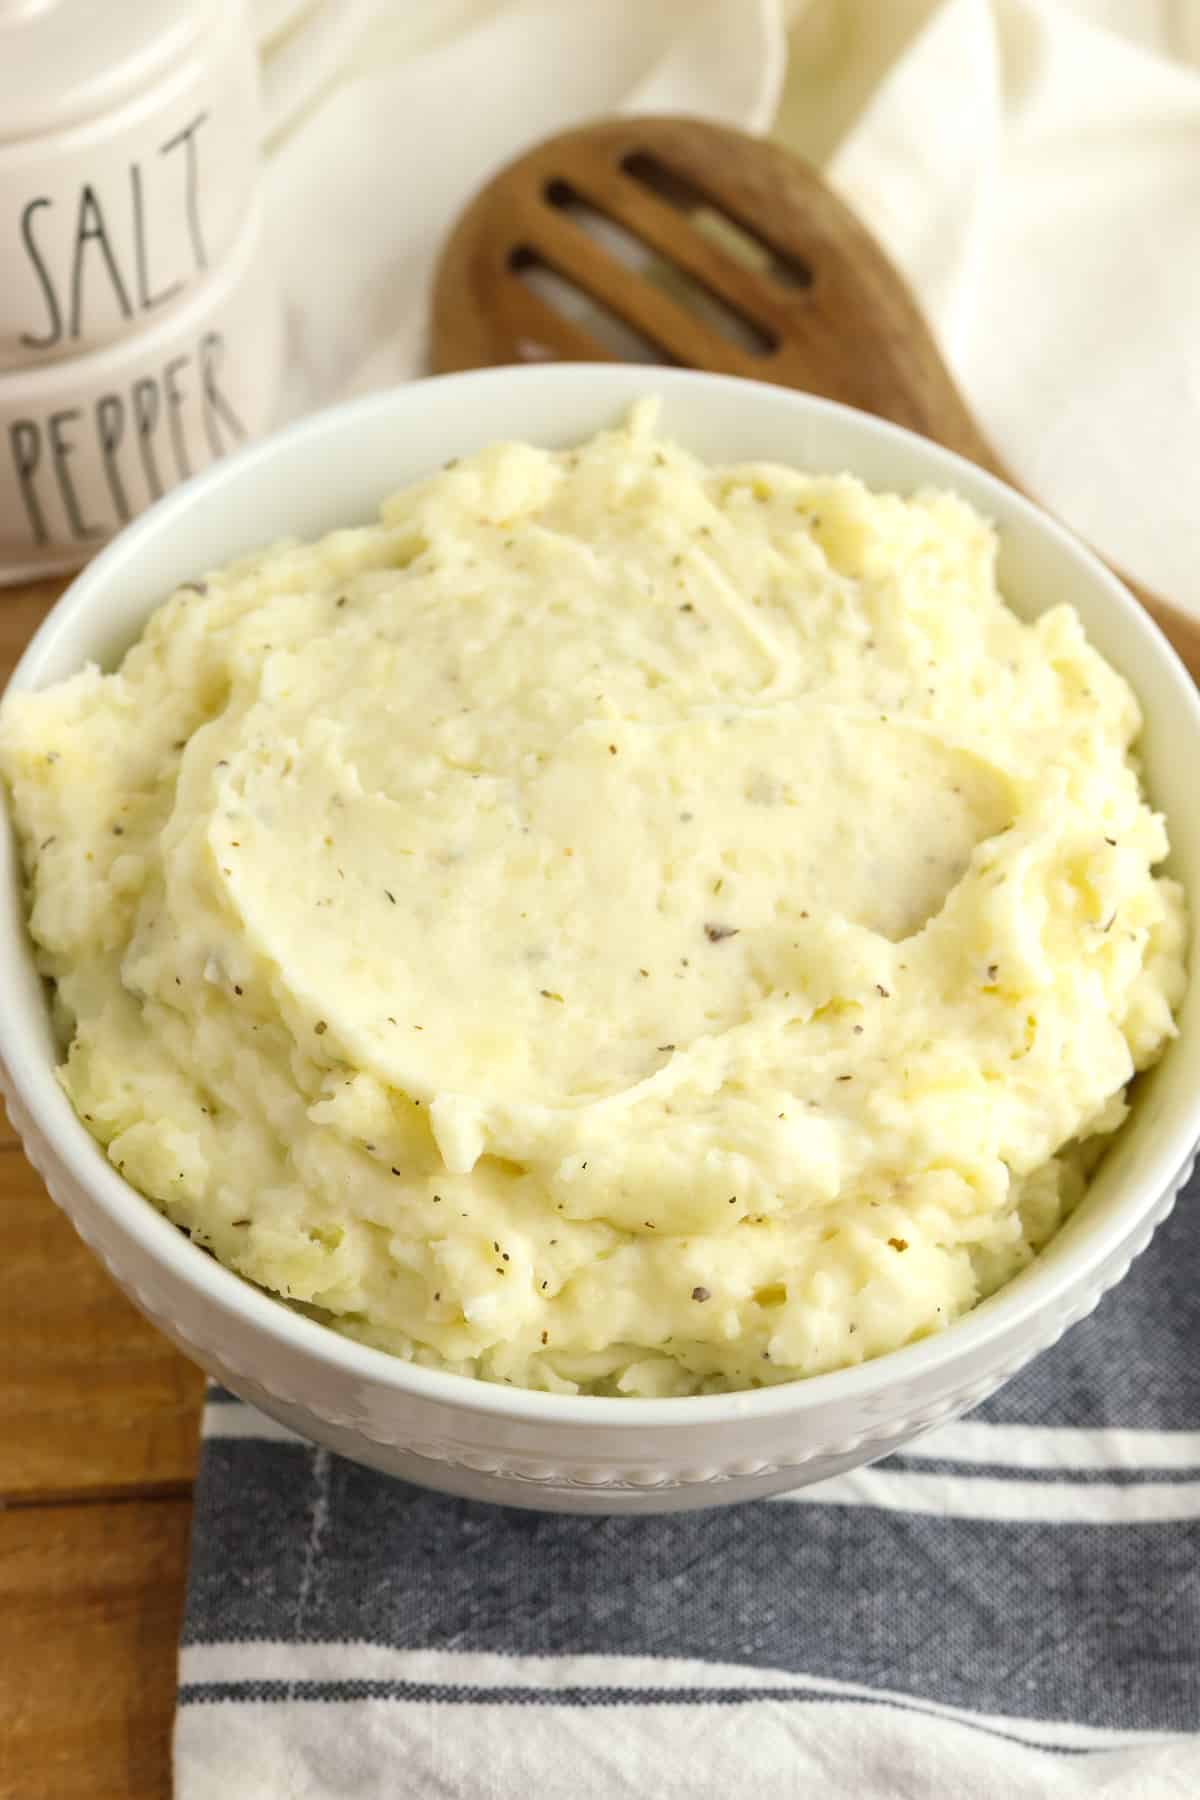 A serving bowl of garlic cream cheesed mashed potatoes on a table.